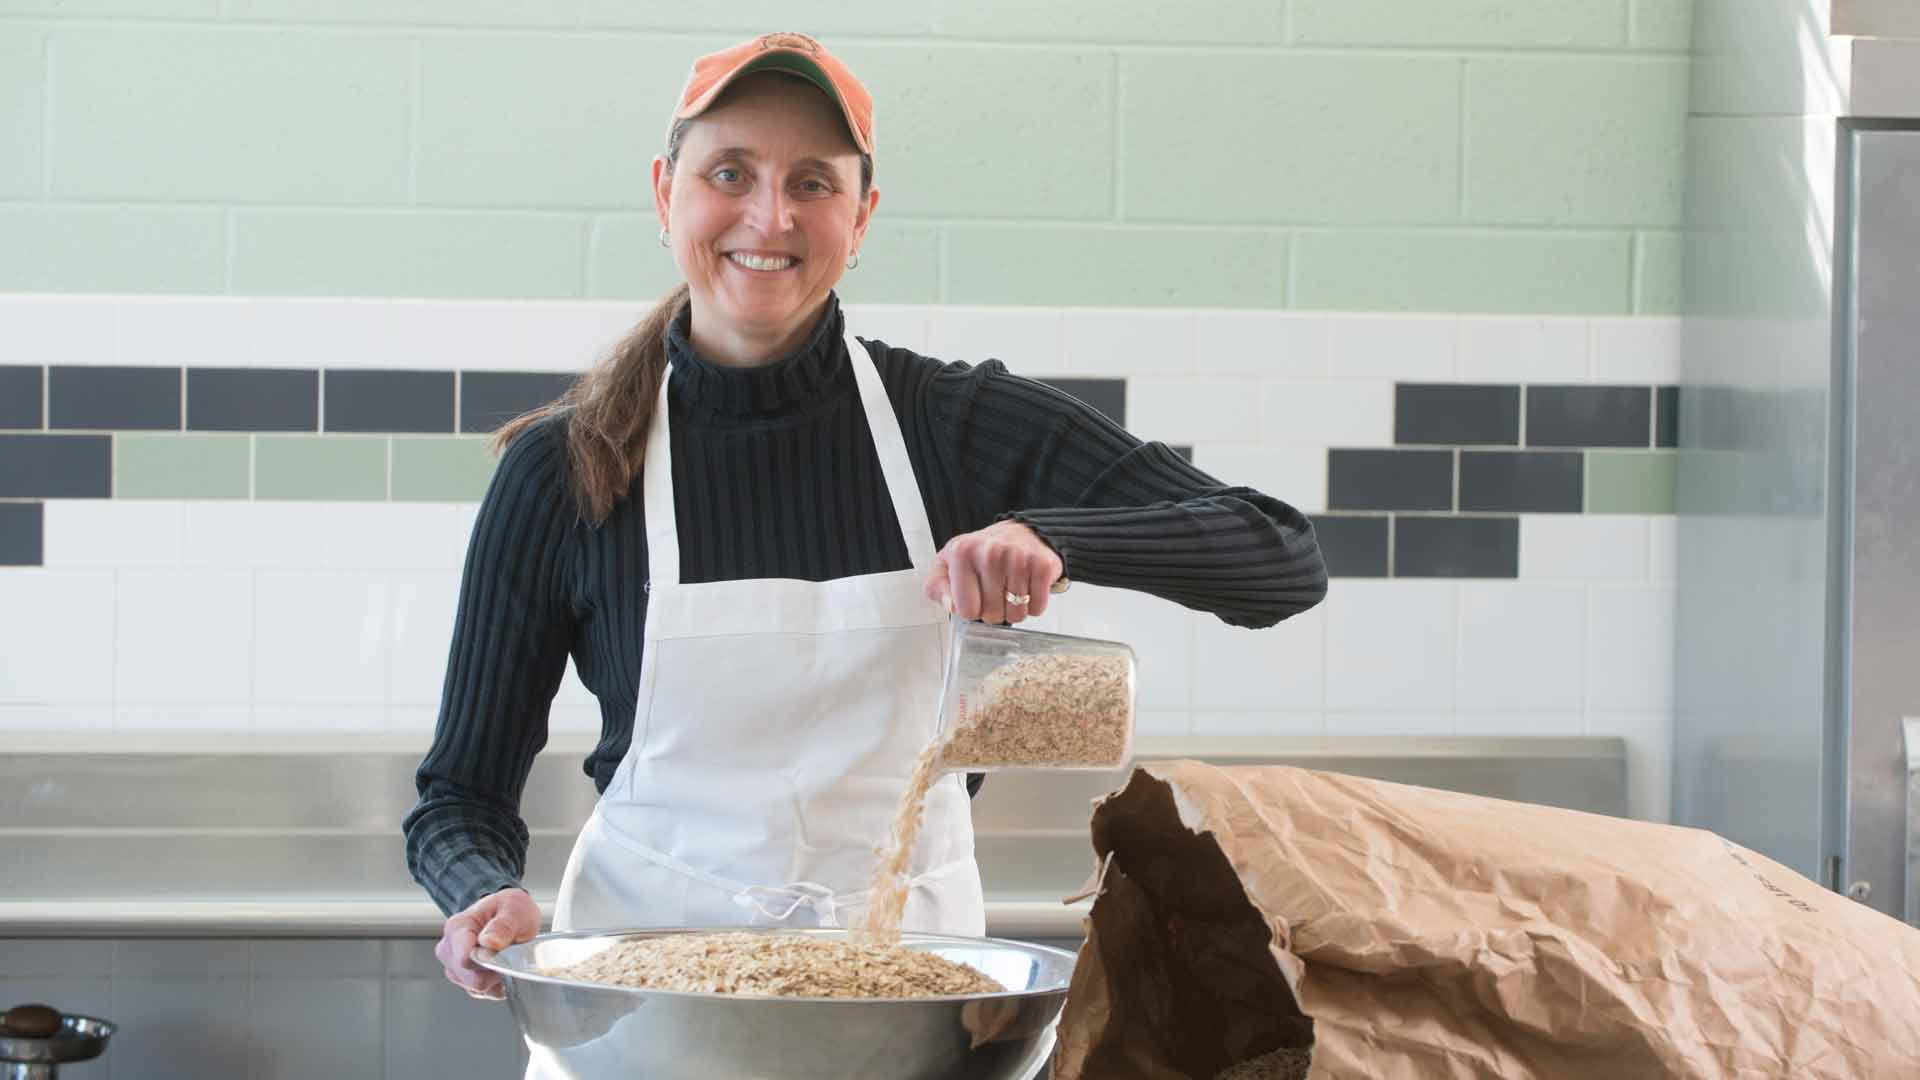 woman with apron on pouring granola into a large steel bowl